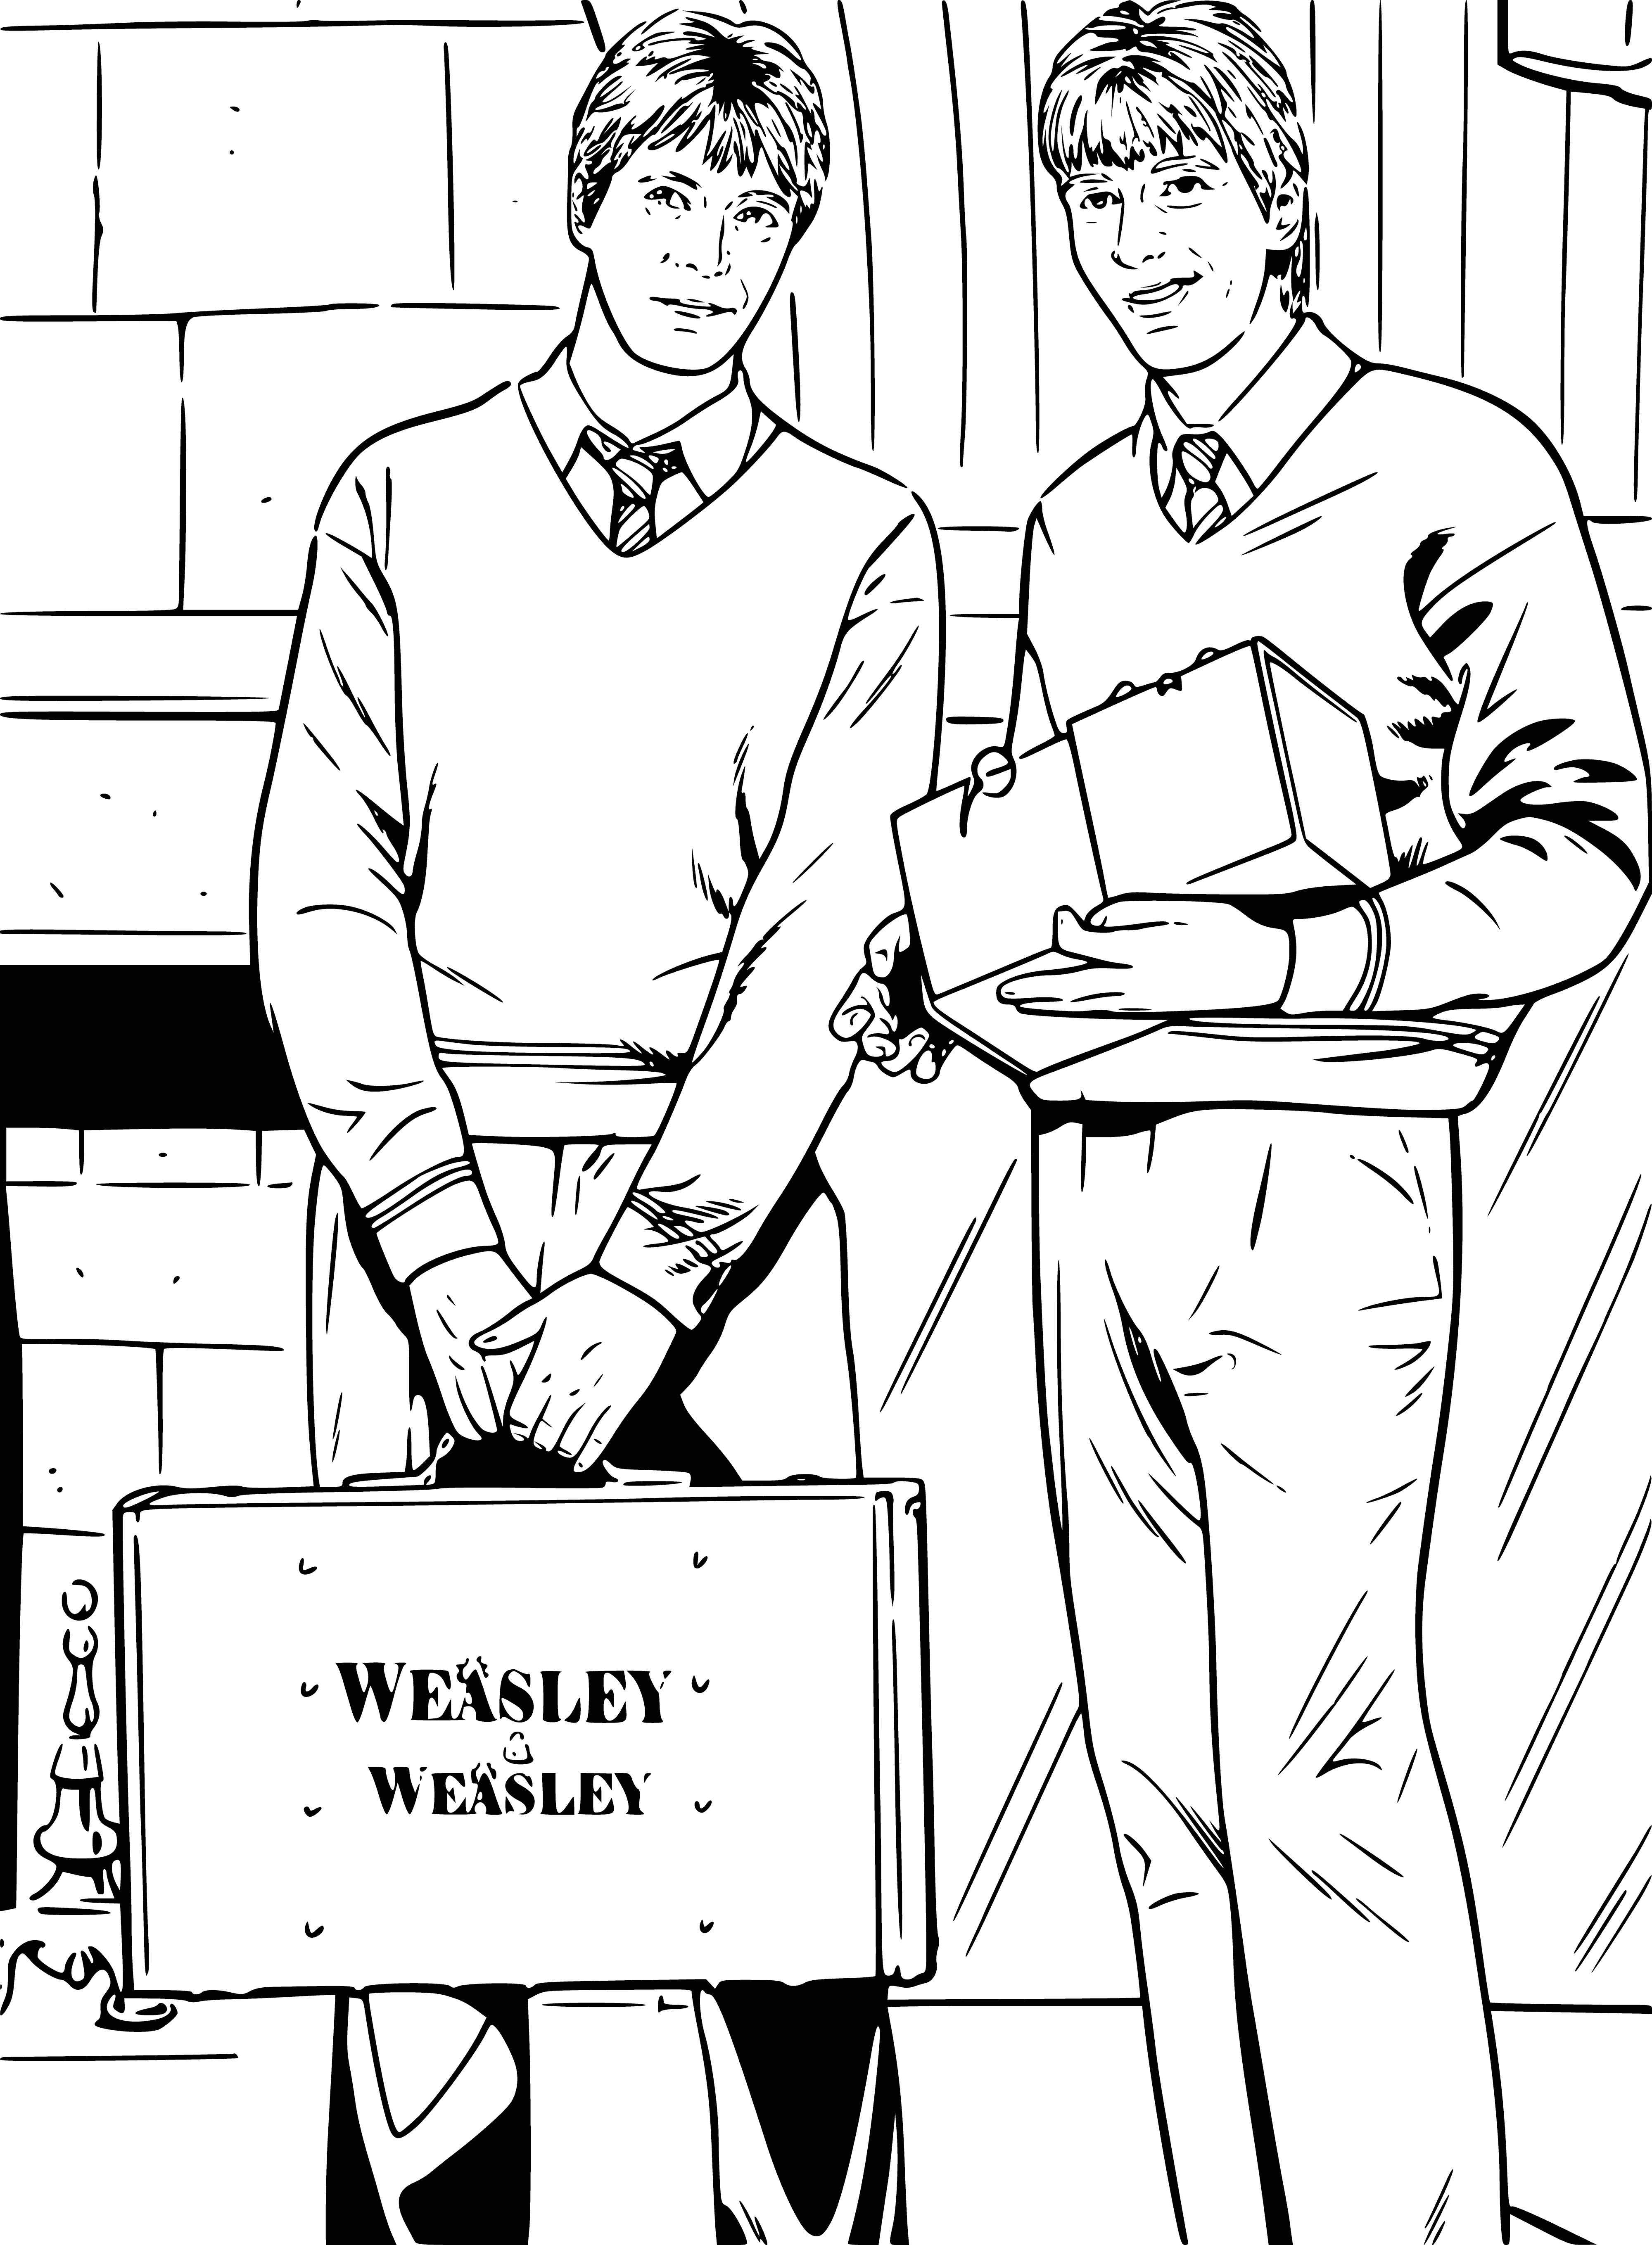 coloring page: Two teens in Gryffindor robes with red hair & freckles holding cats; one looks mischievous & the other about to laugh.